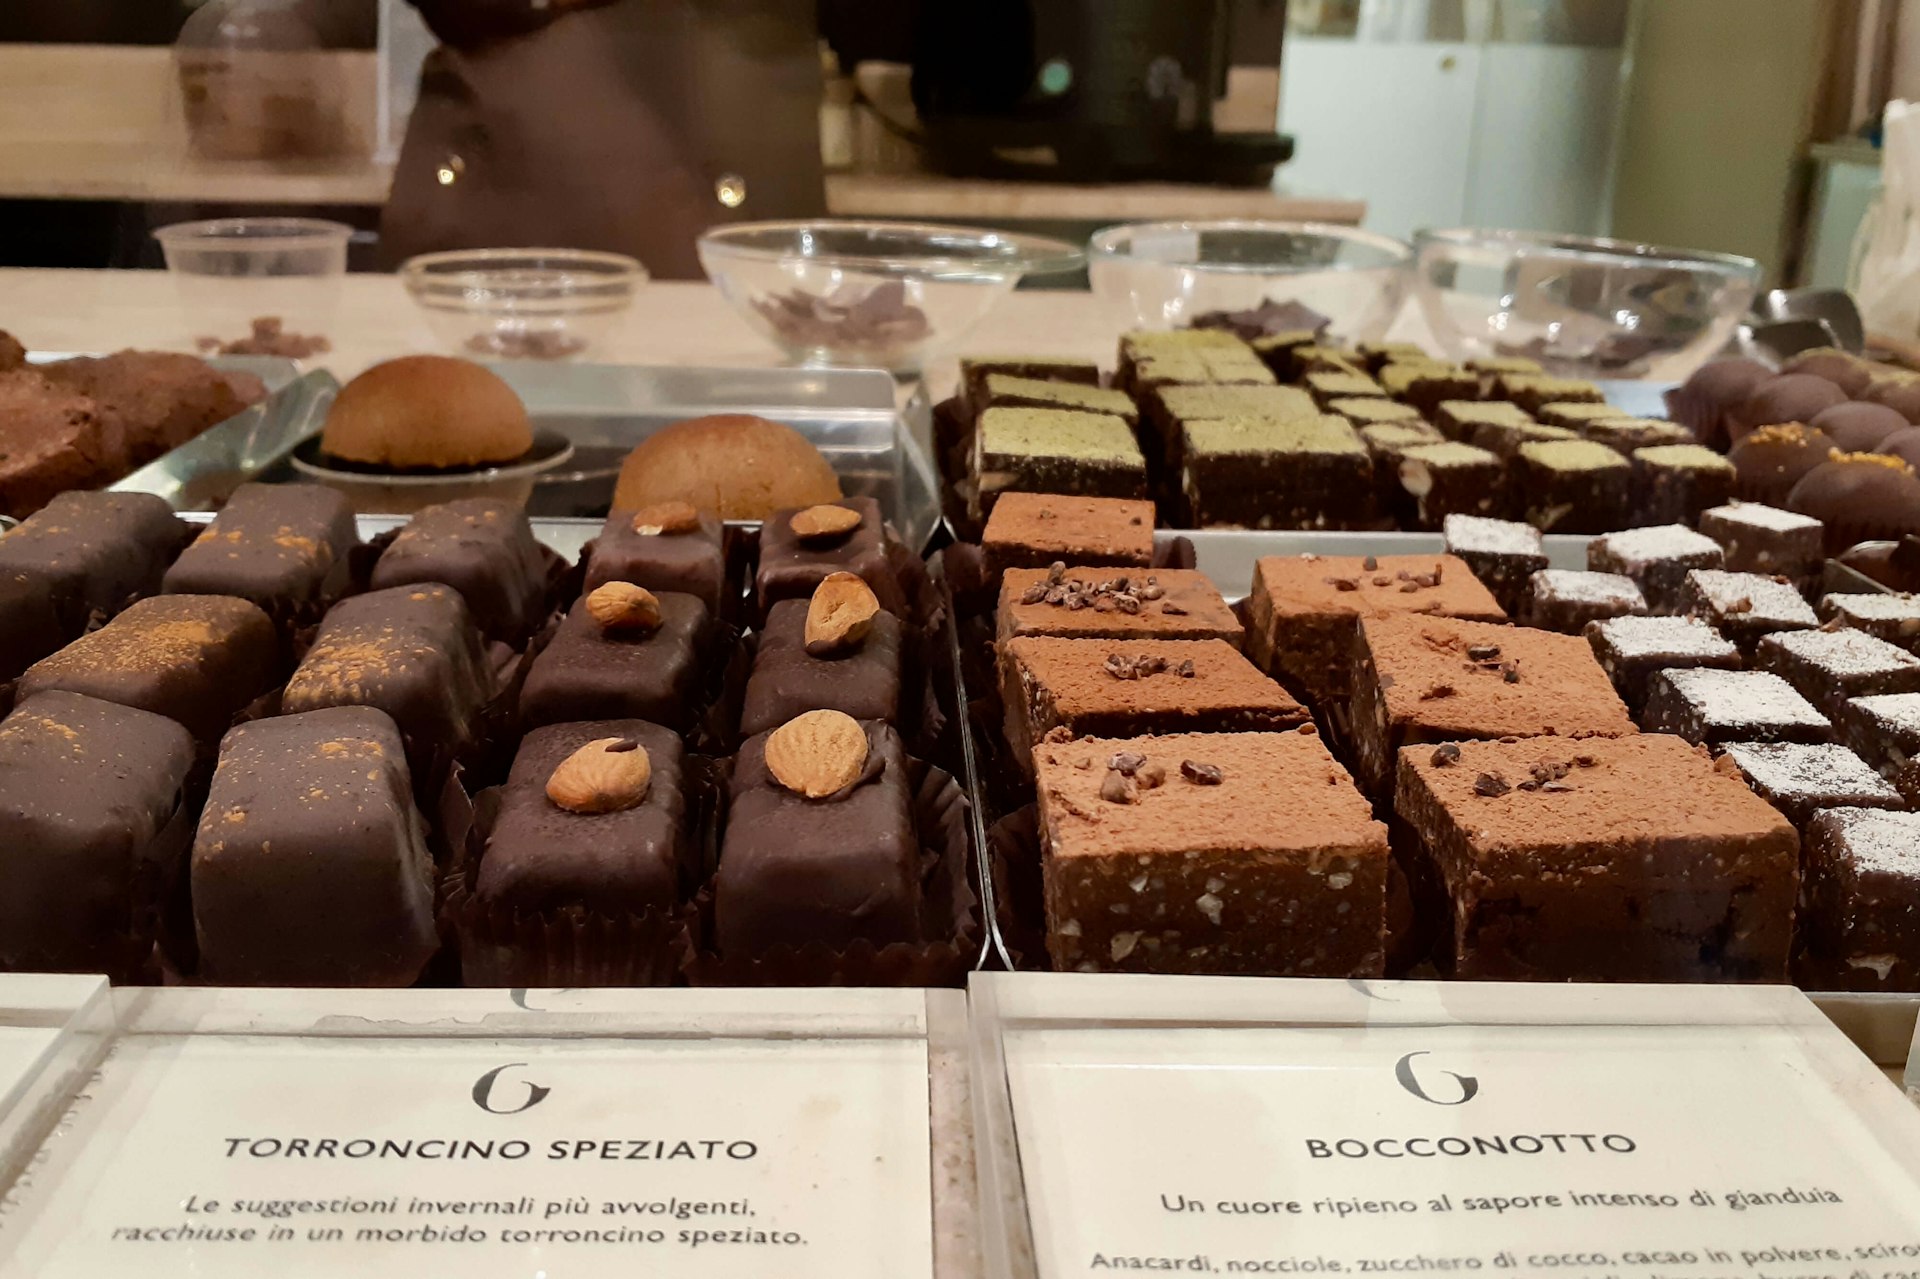 Chocolate on display at Grezzo in Monti, Rome